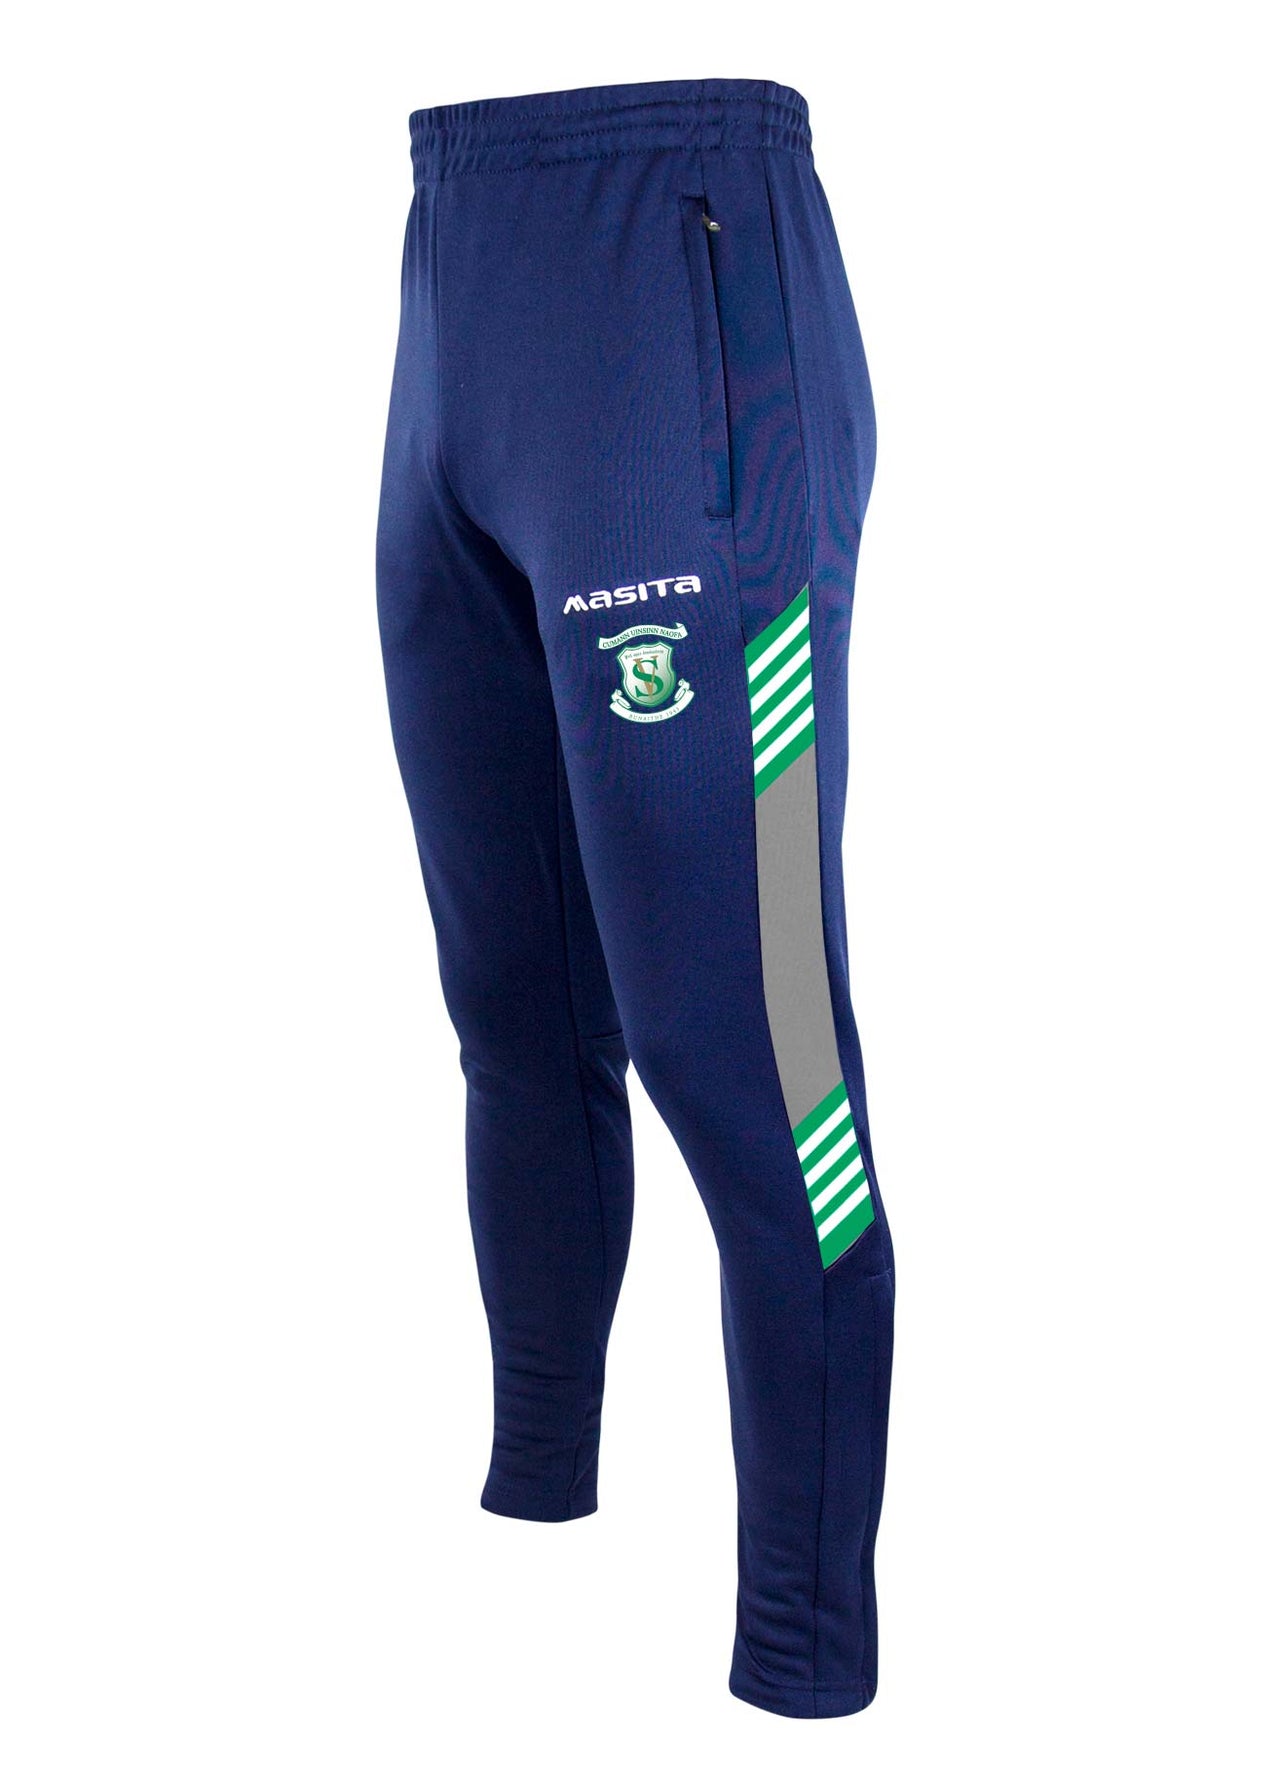 St Vincent's GAA Skinny Bottoms Adults